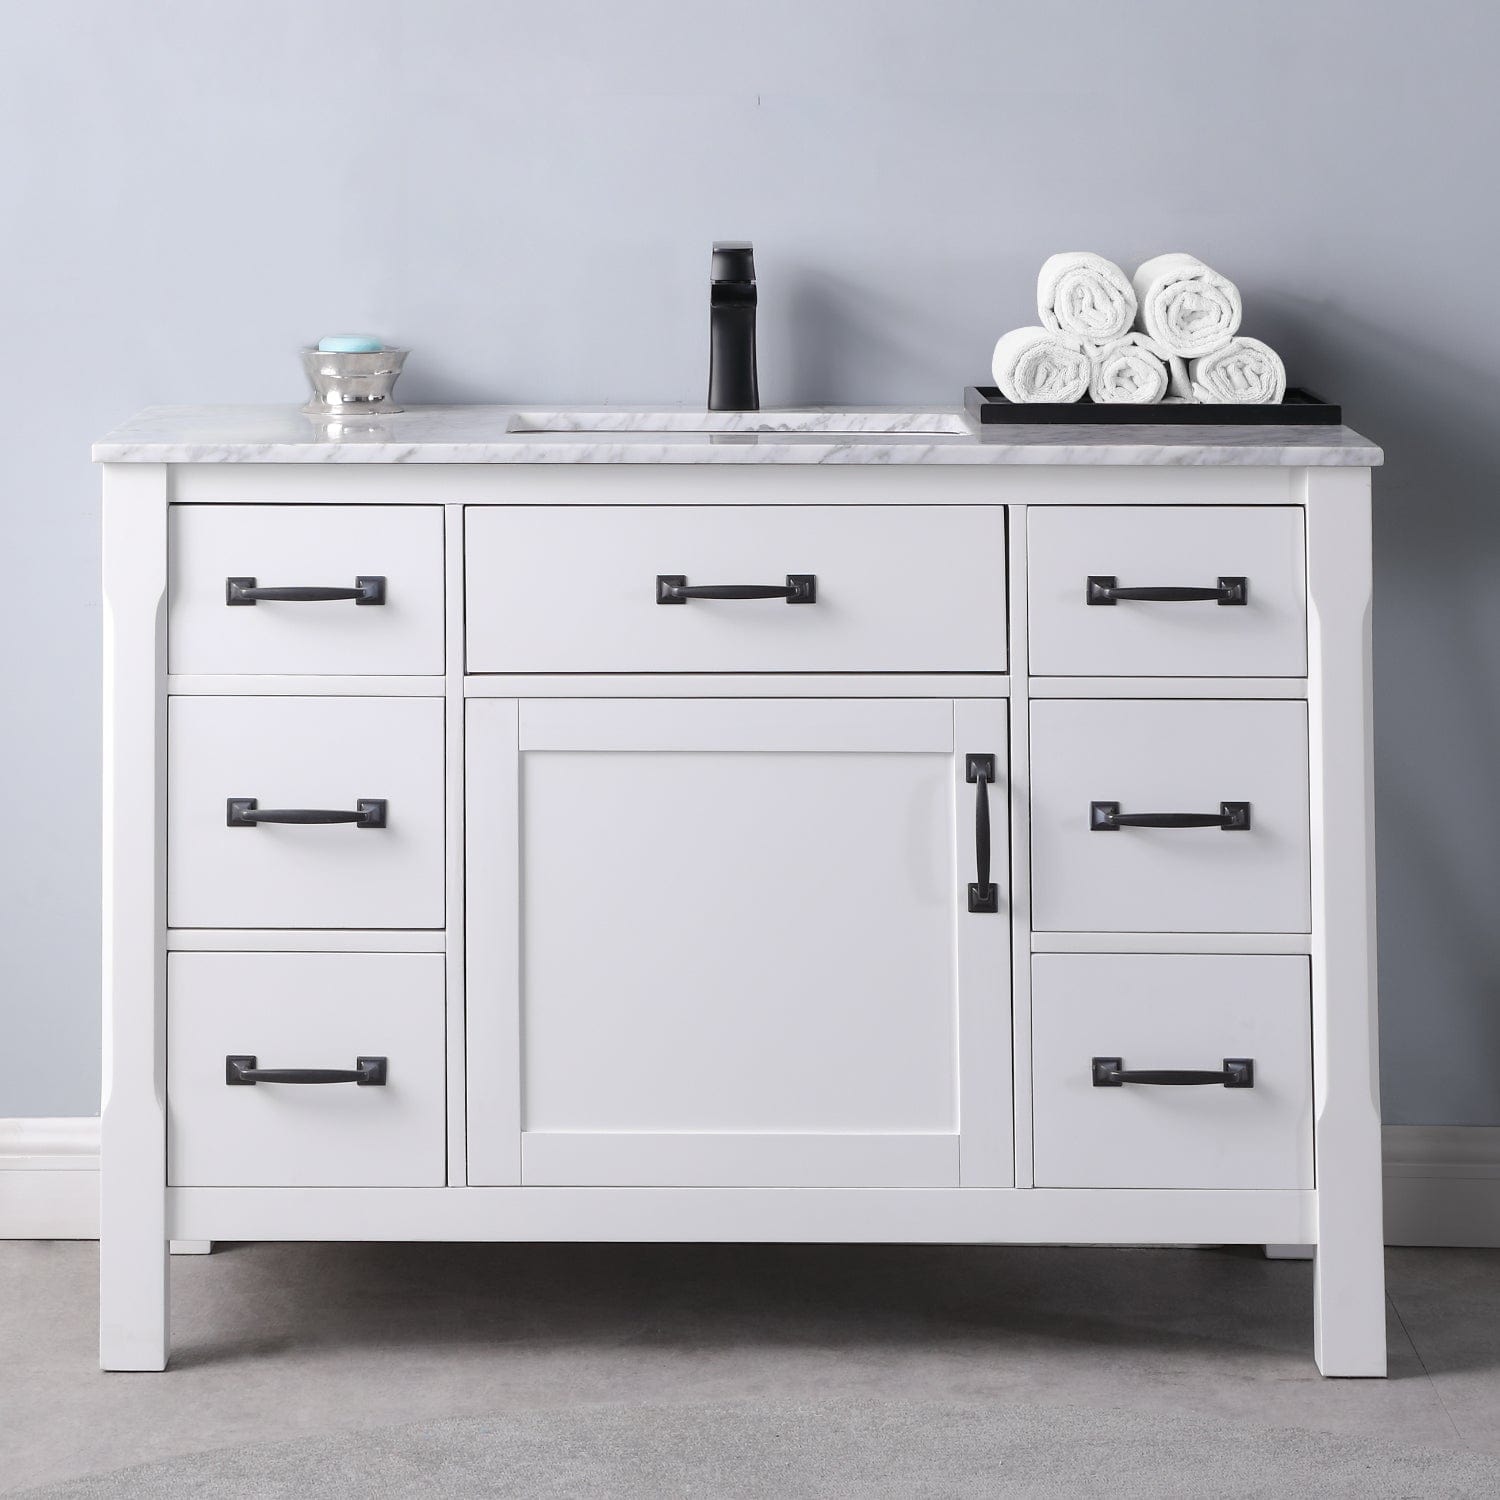 Altair Maribella 48" Single Bathroom Vanity Set in White and Carrara White Marble Countertop without Mirror 535048-WH-CA-NM - Molaix631112970341Vanity535048-WH-CA-NM